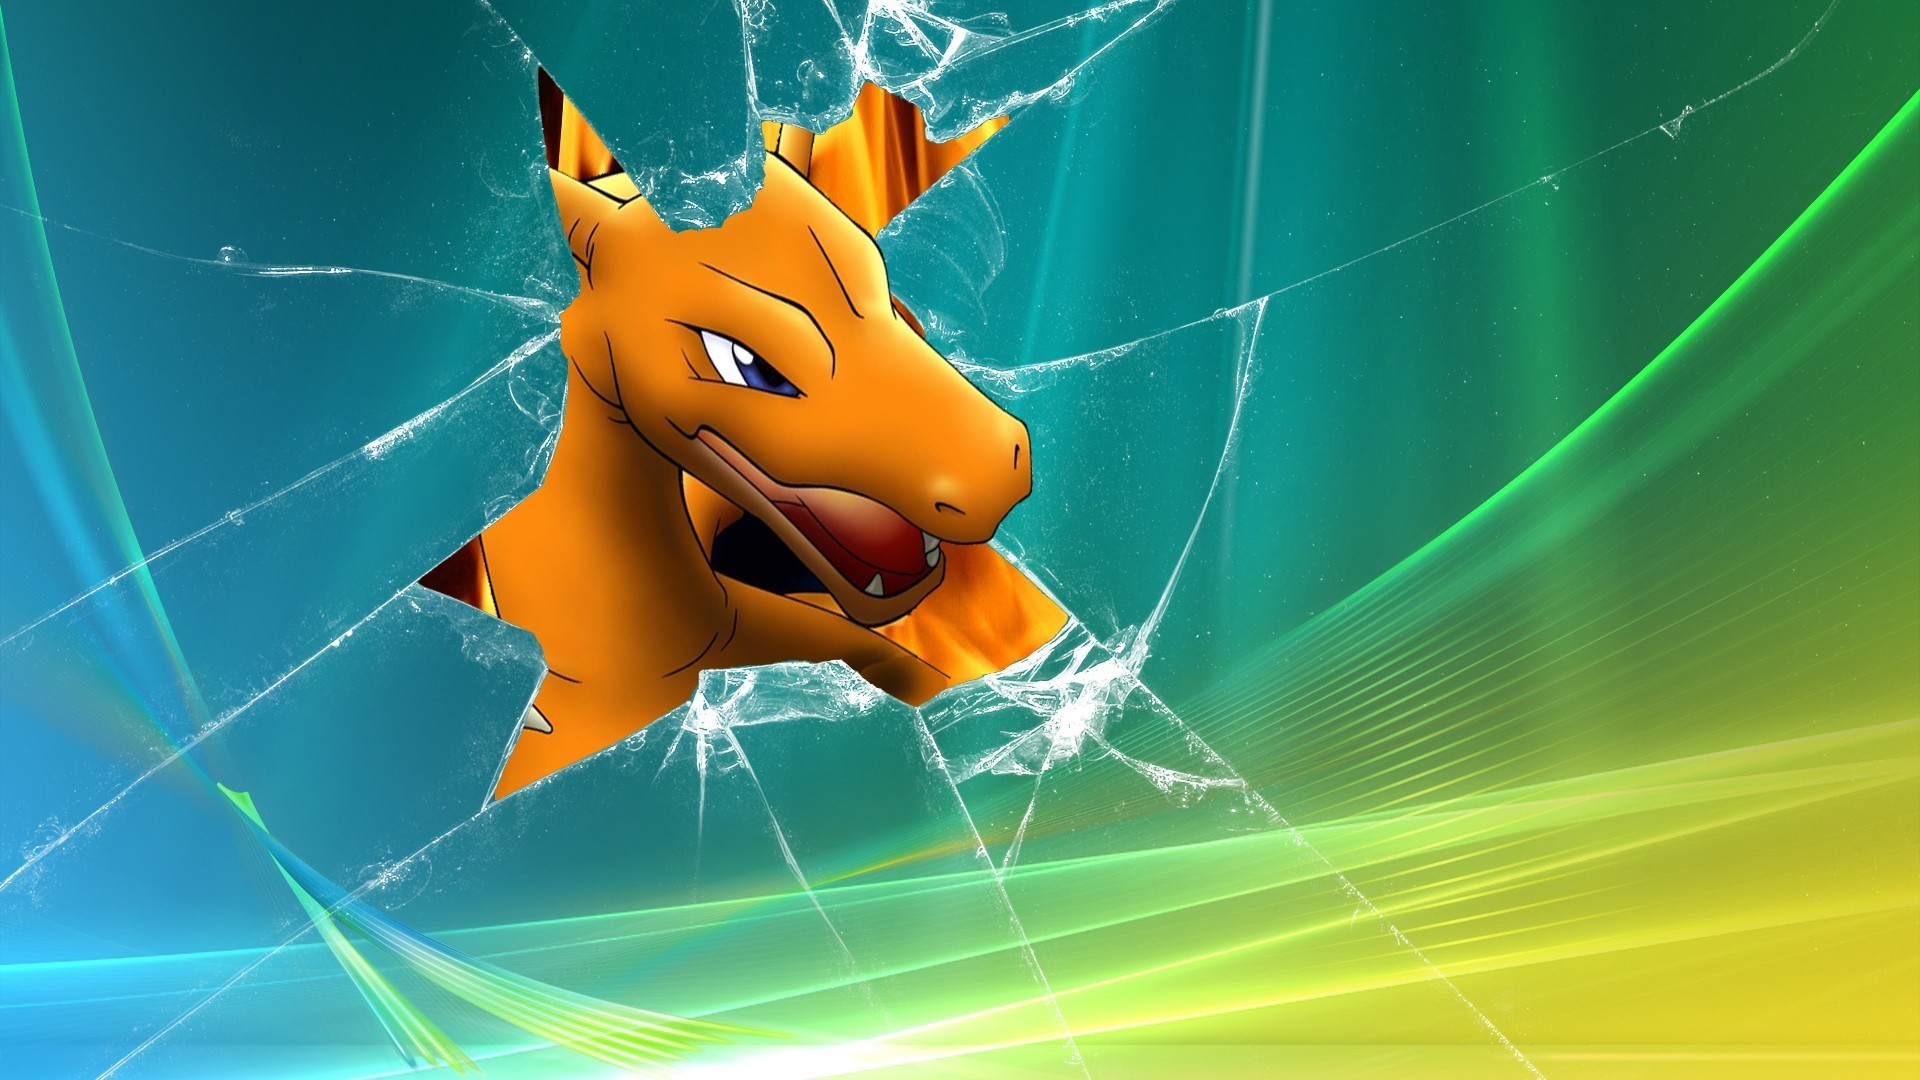 1920x1080 ... All Ash's Charizard moves - YouTube ...